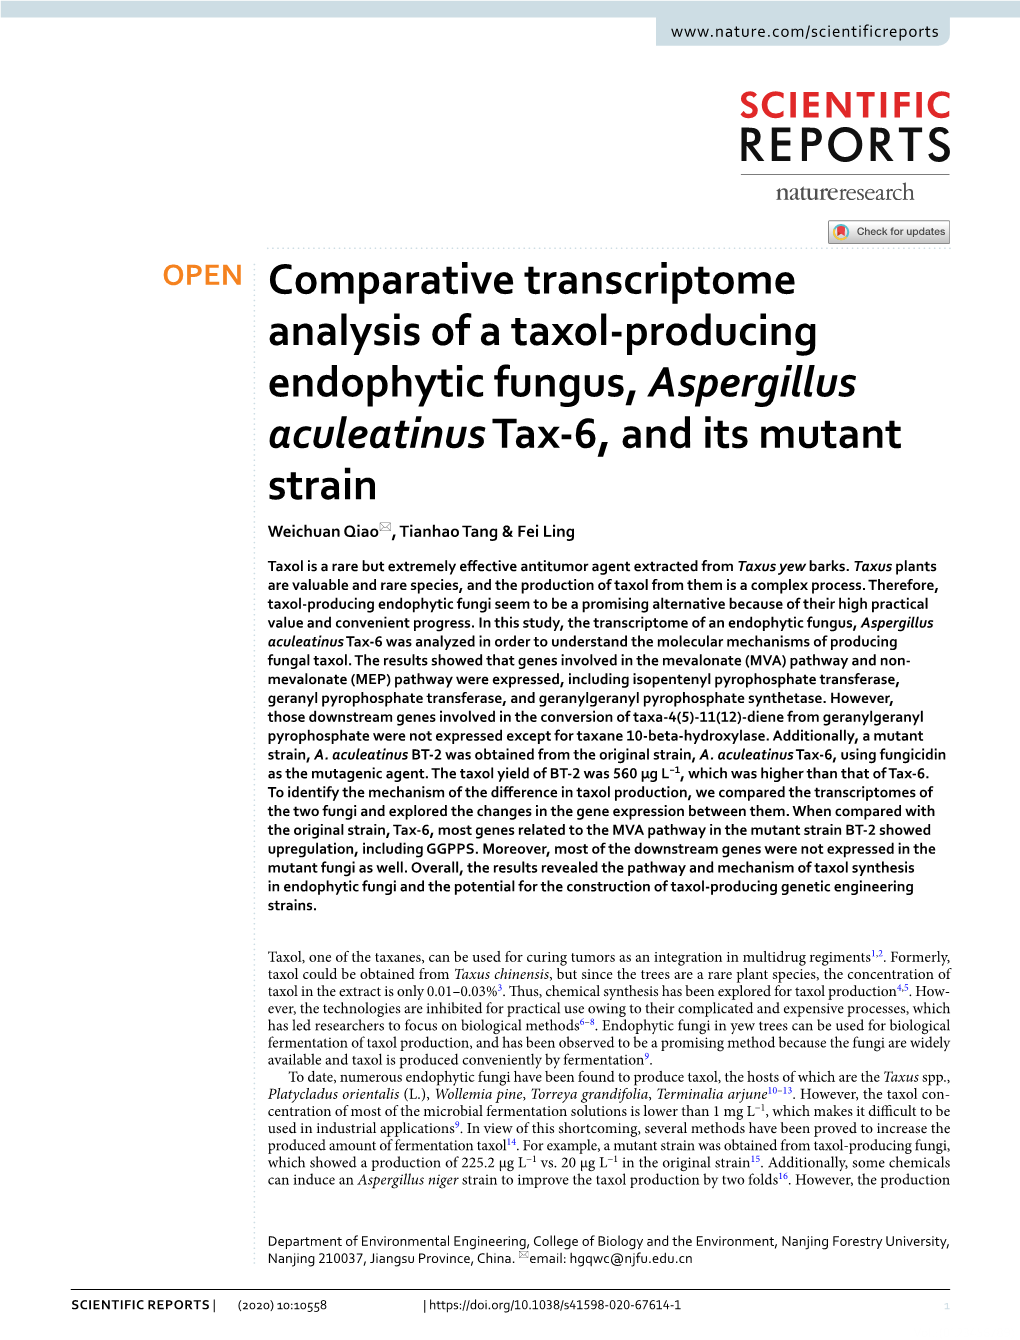 Comparative Transcriptome Analysis of a Taxol-Producing Endophytic